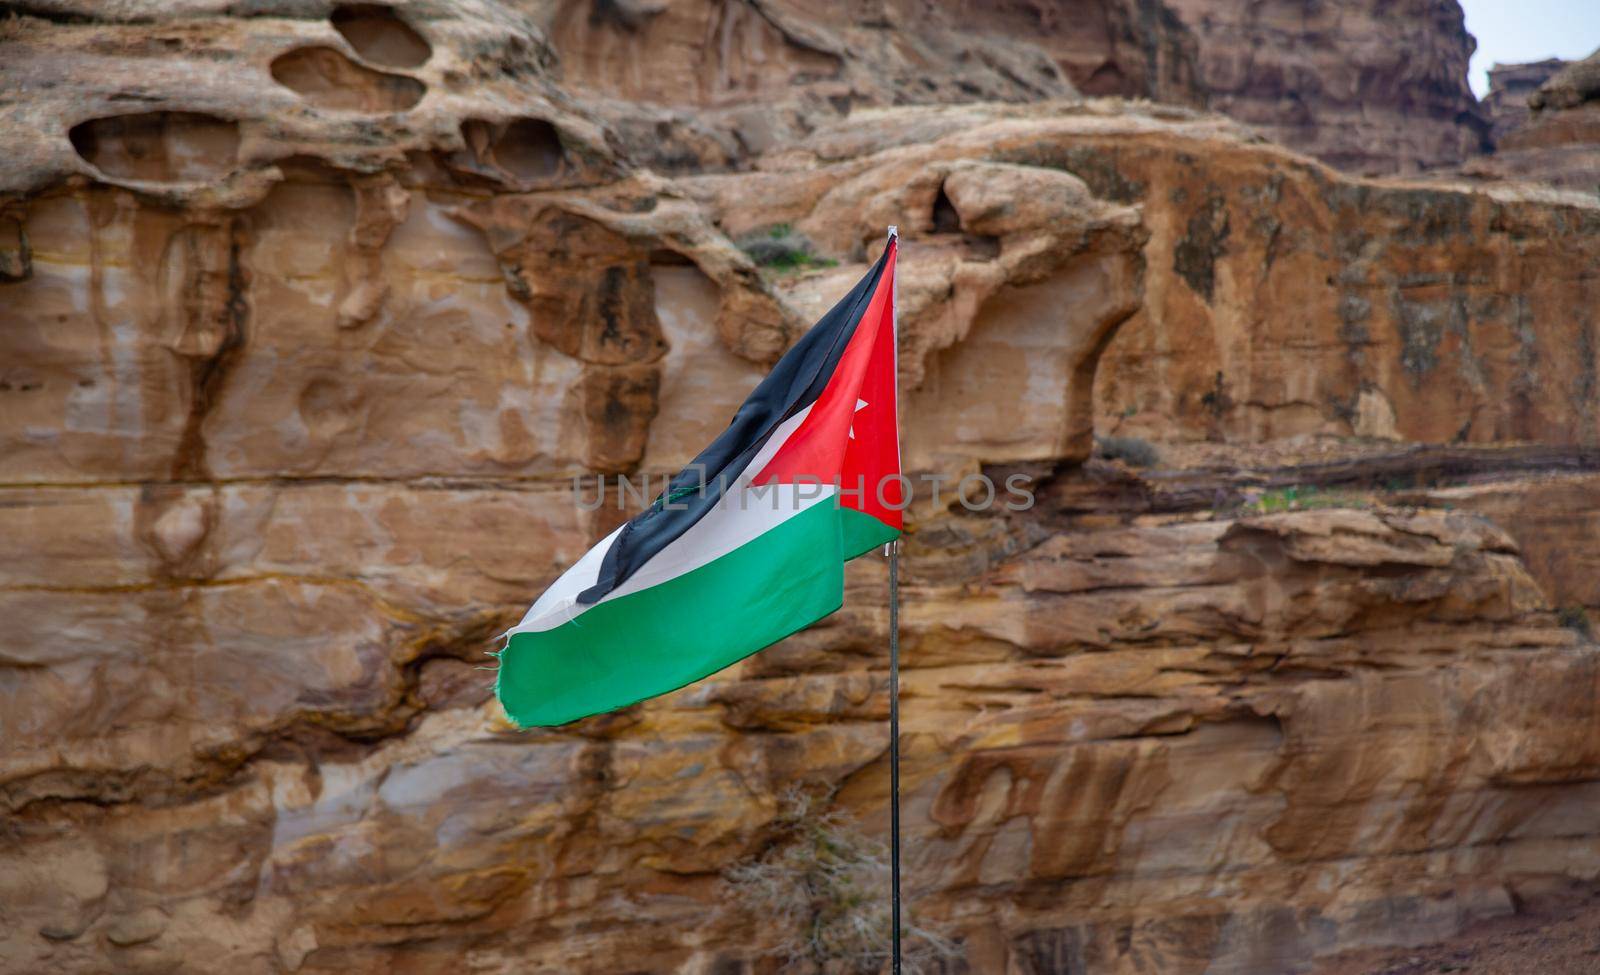 The flag of Jordan flies in Petra and beautiful red mountains can be seen in the background 20 February 2020